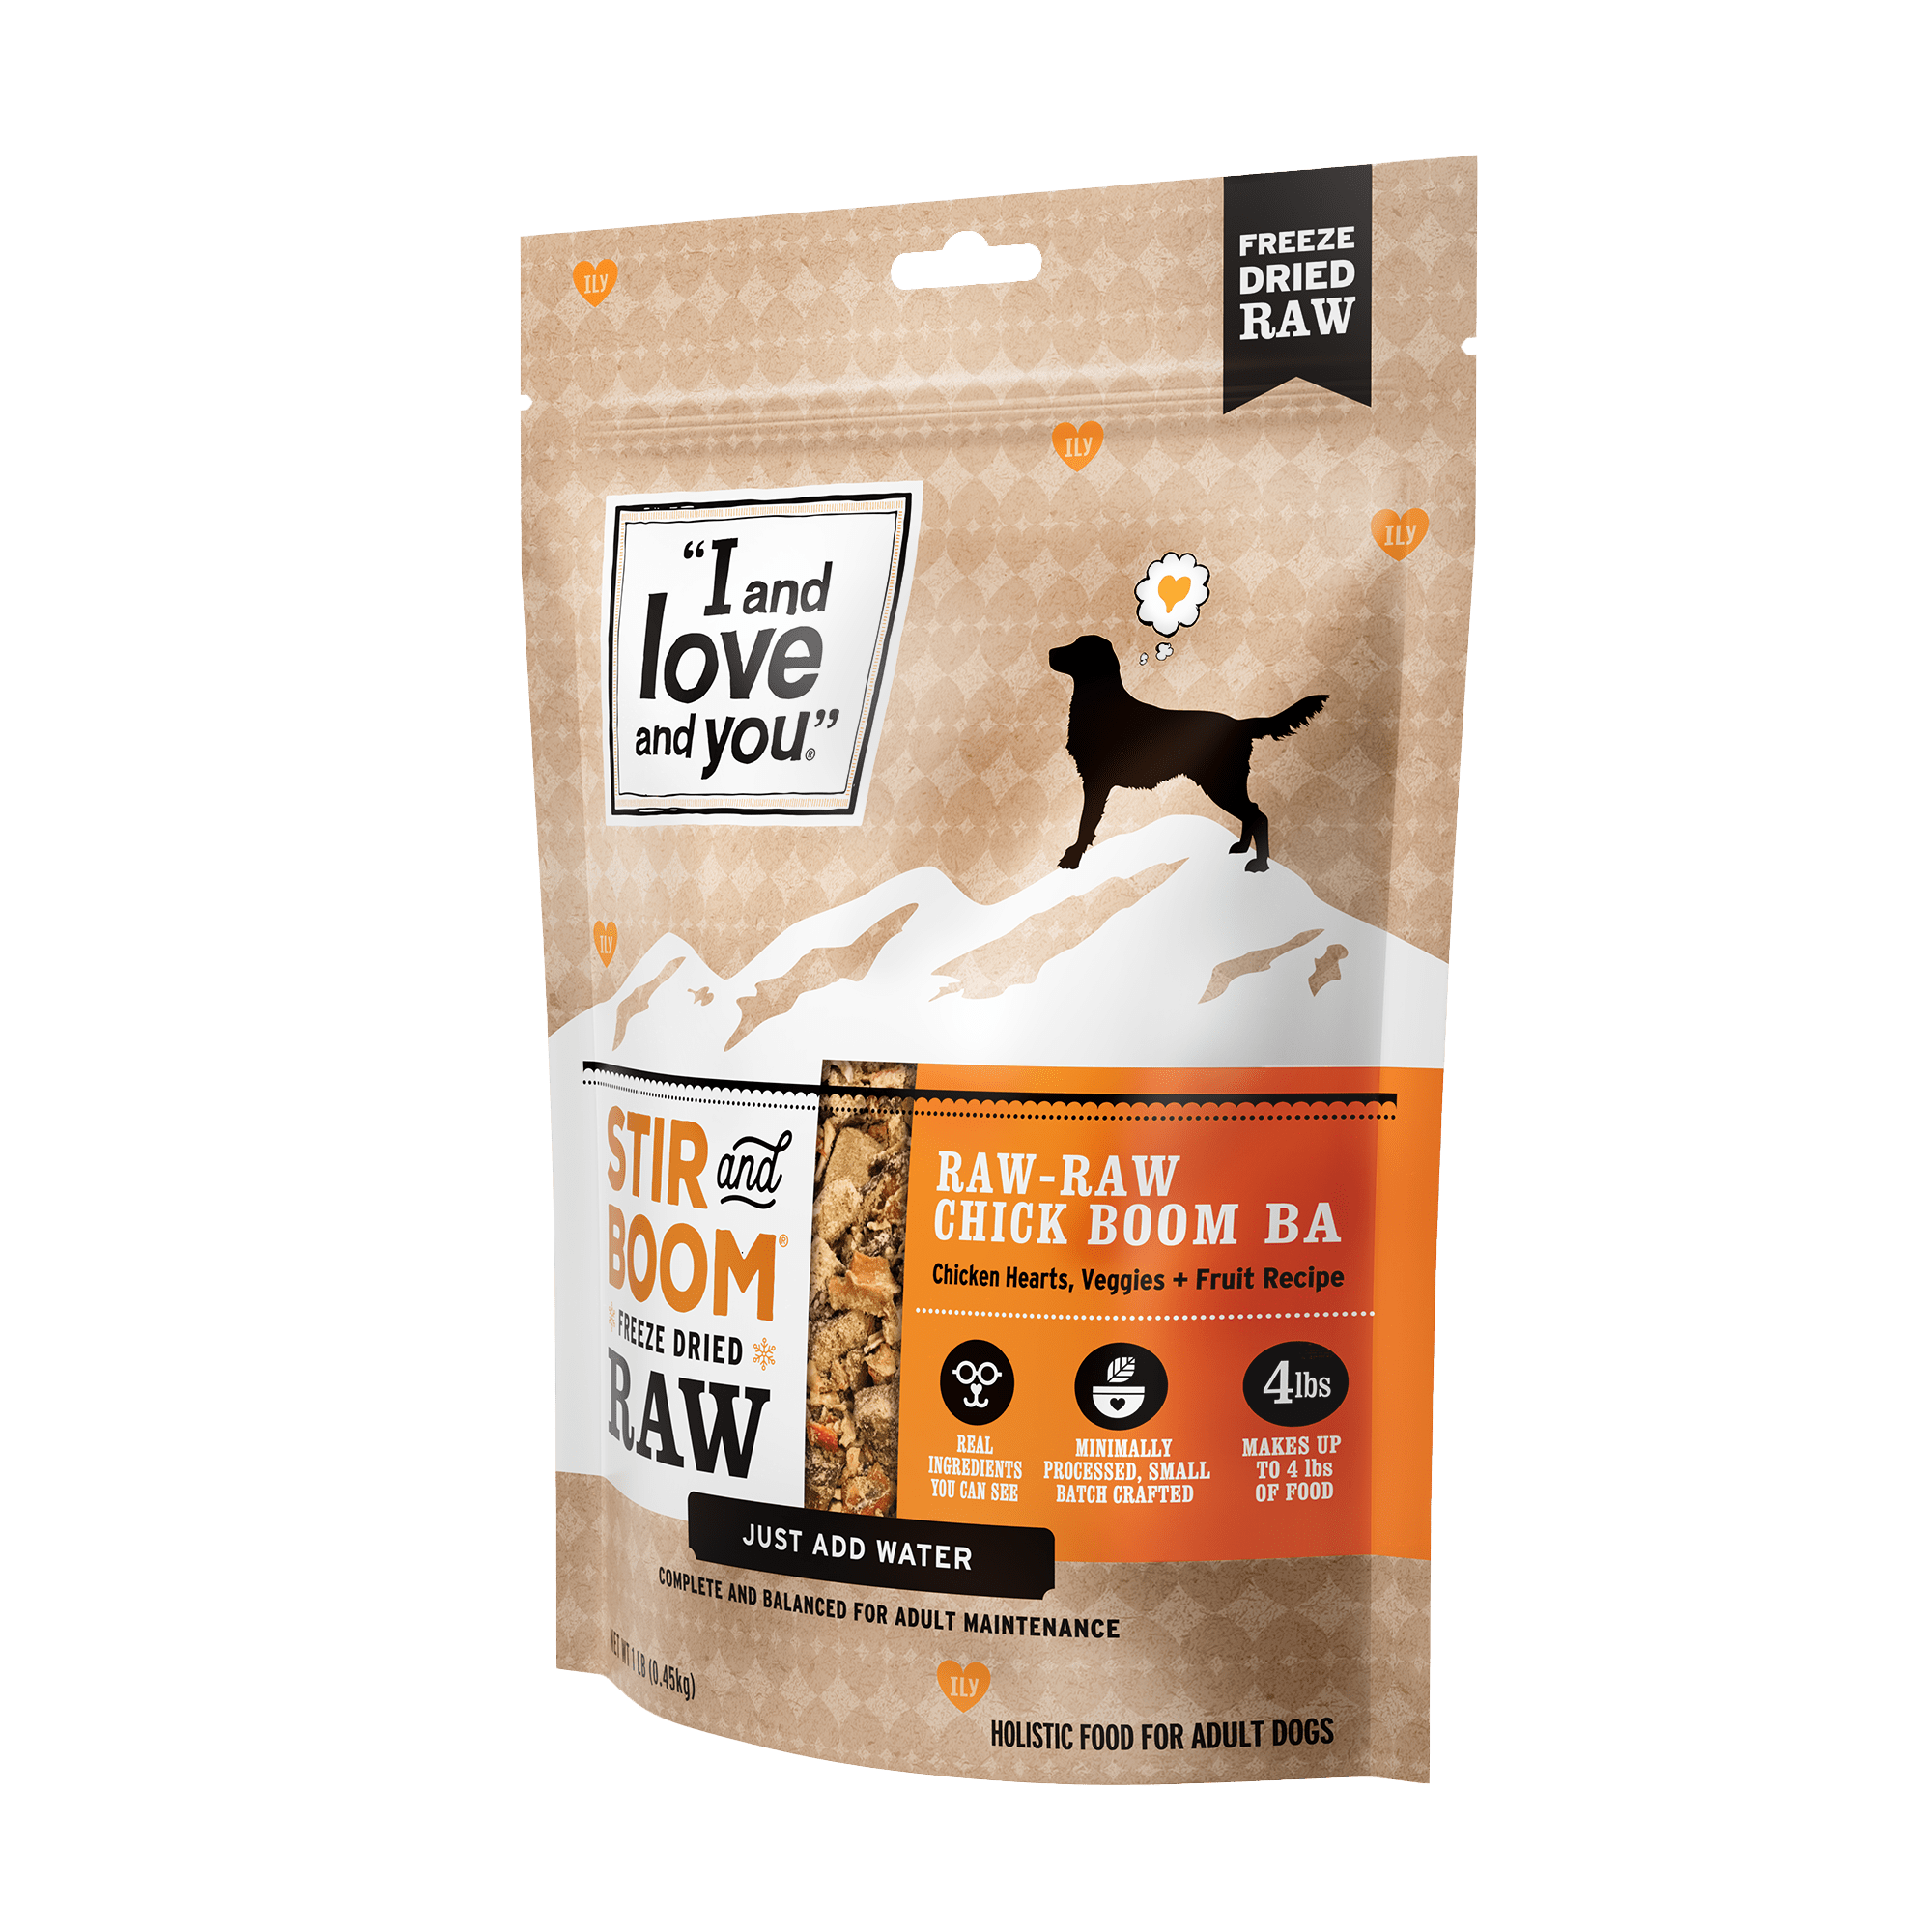 Stir & Boom - Raw Raw Chick Boom Ba: Dehydrated dog food bag with real, nutritious ingredients like chicken hearts and veggies.